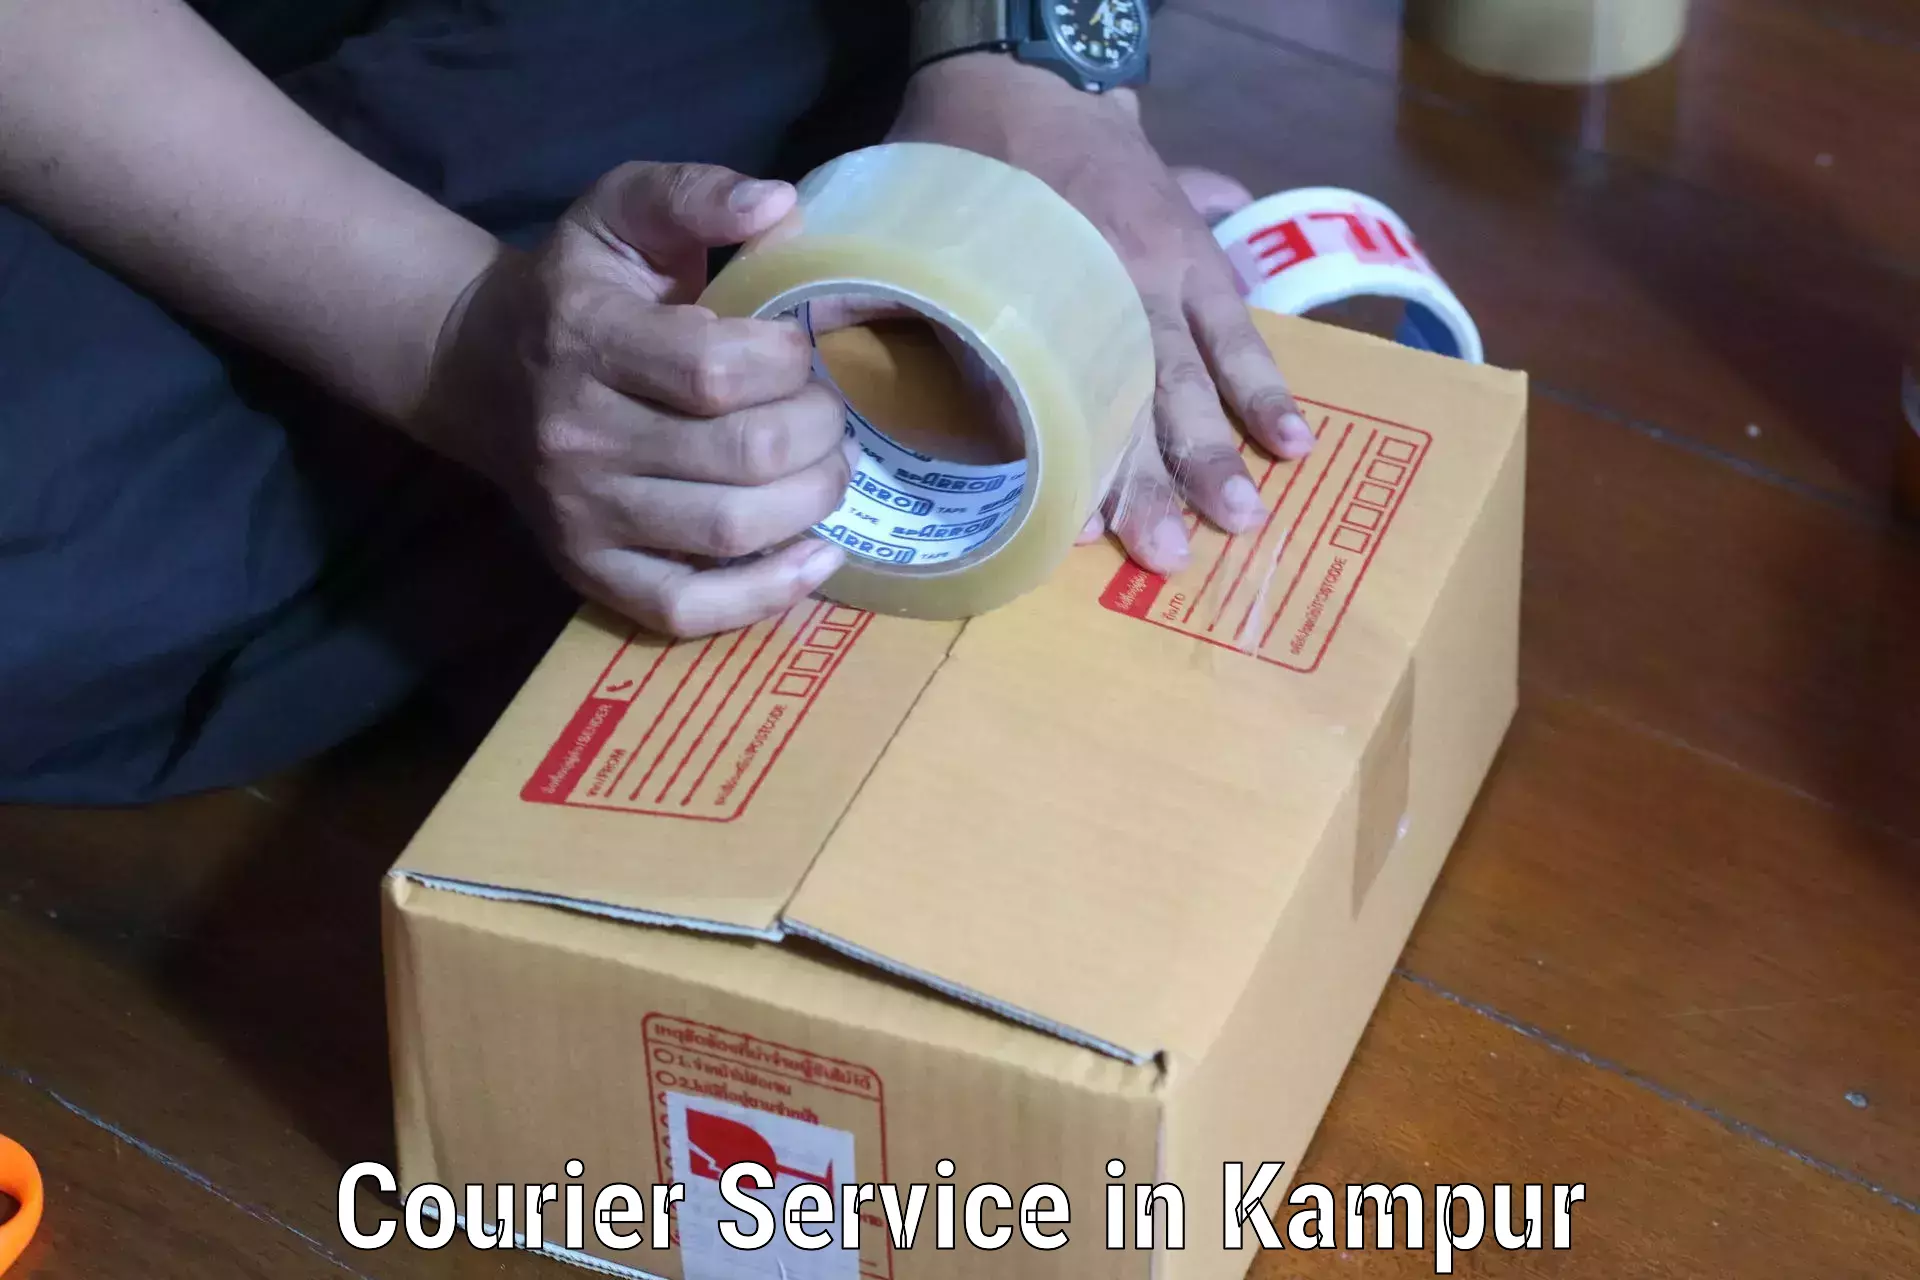 Delivery service partnership in Kampur